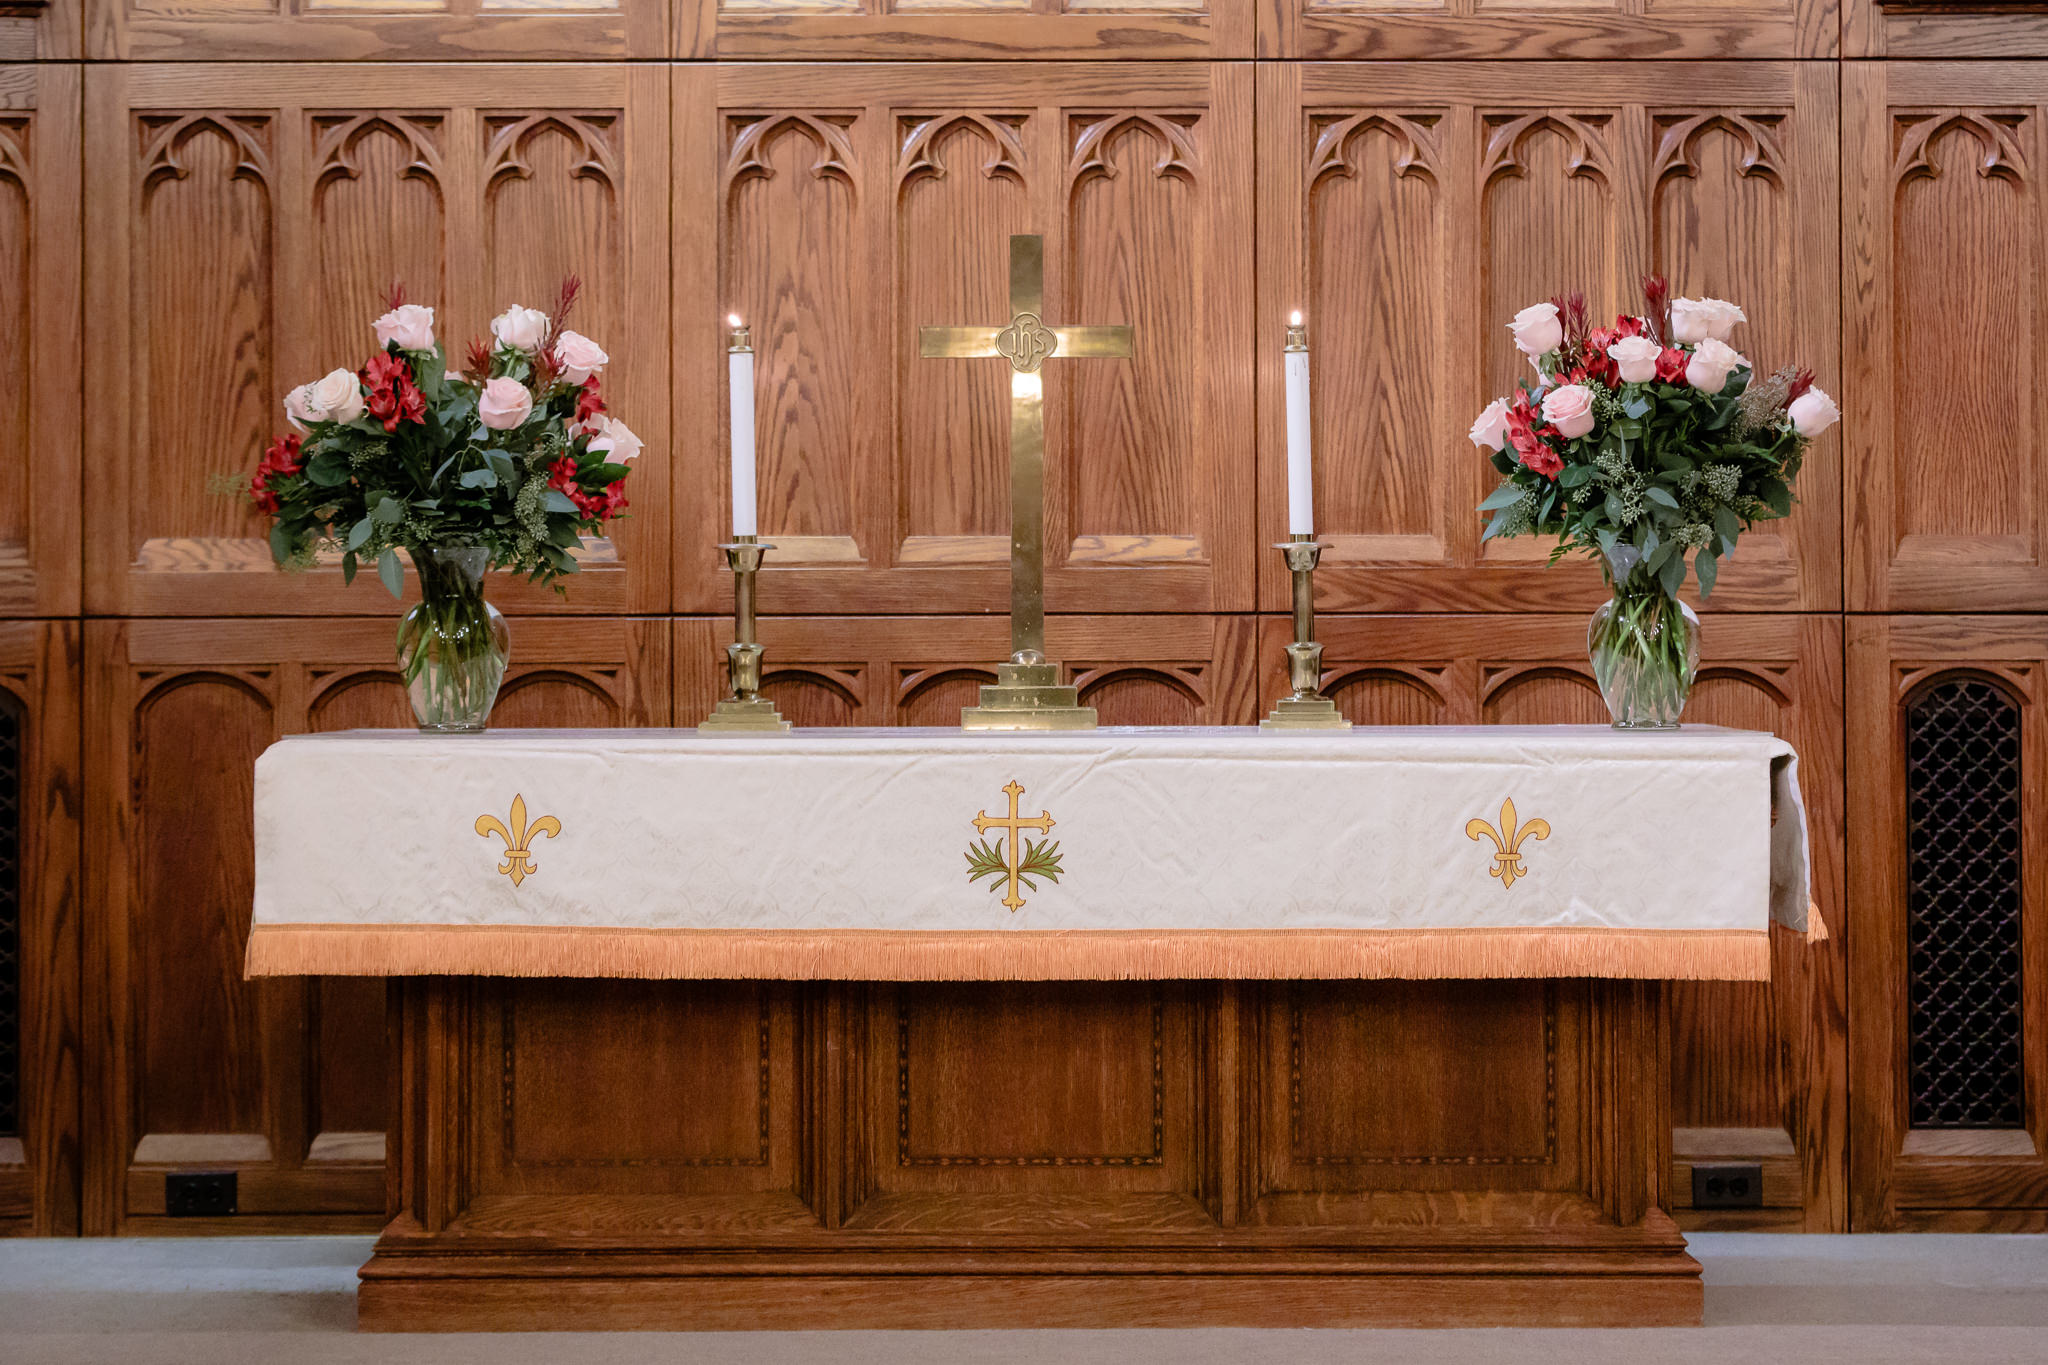 Floral arrangements by Wallace Bethel Park Flowers on the altar of the Smithfield United Church of Christ